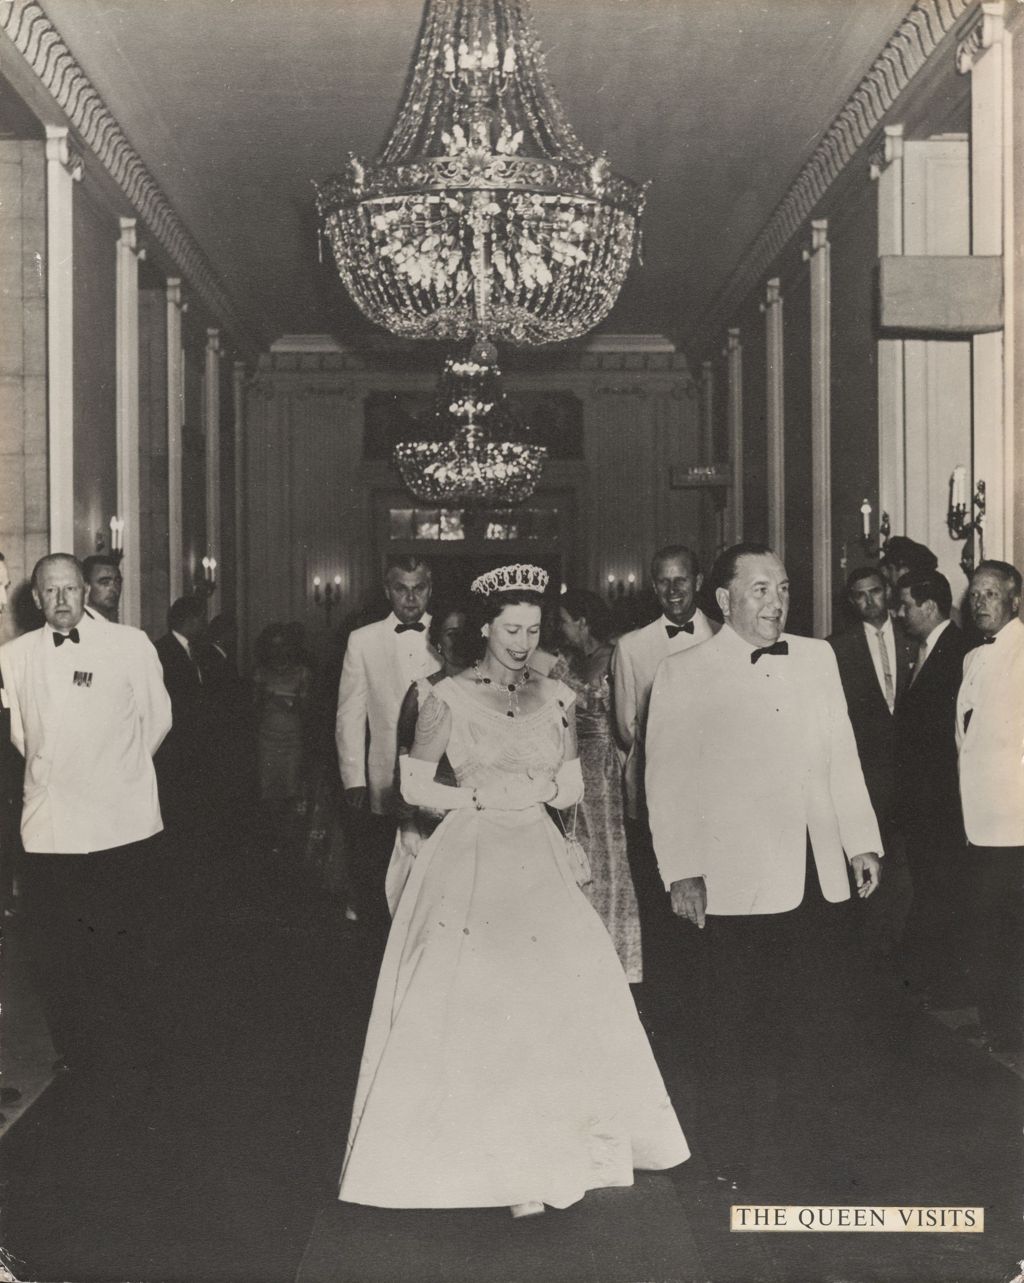 Richard J. Daley with Queen Elizabeth II and others at a dinner event in Chicago